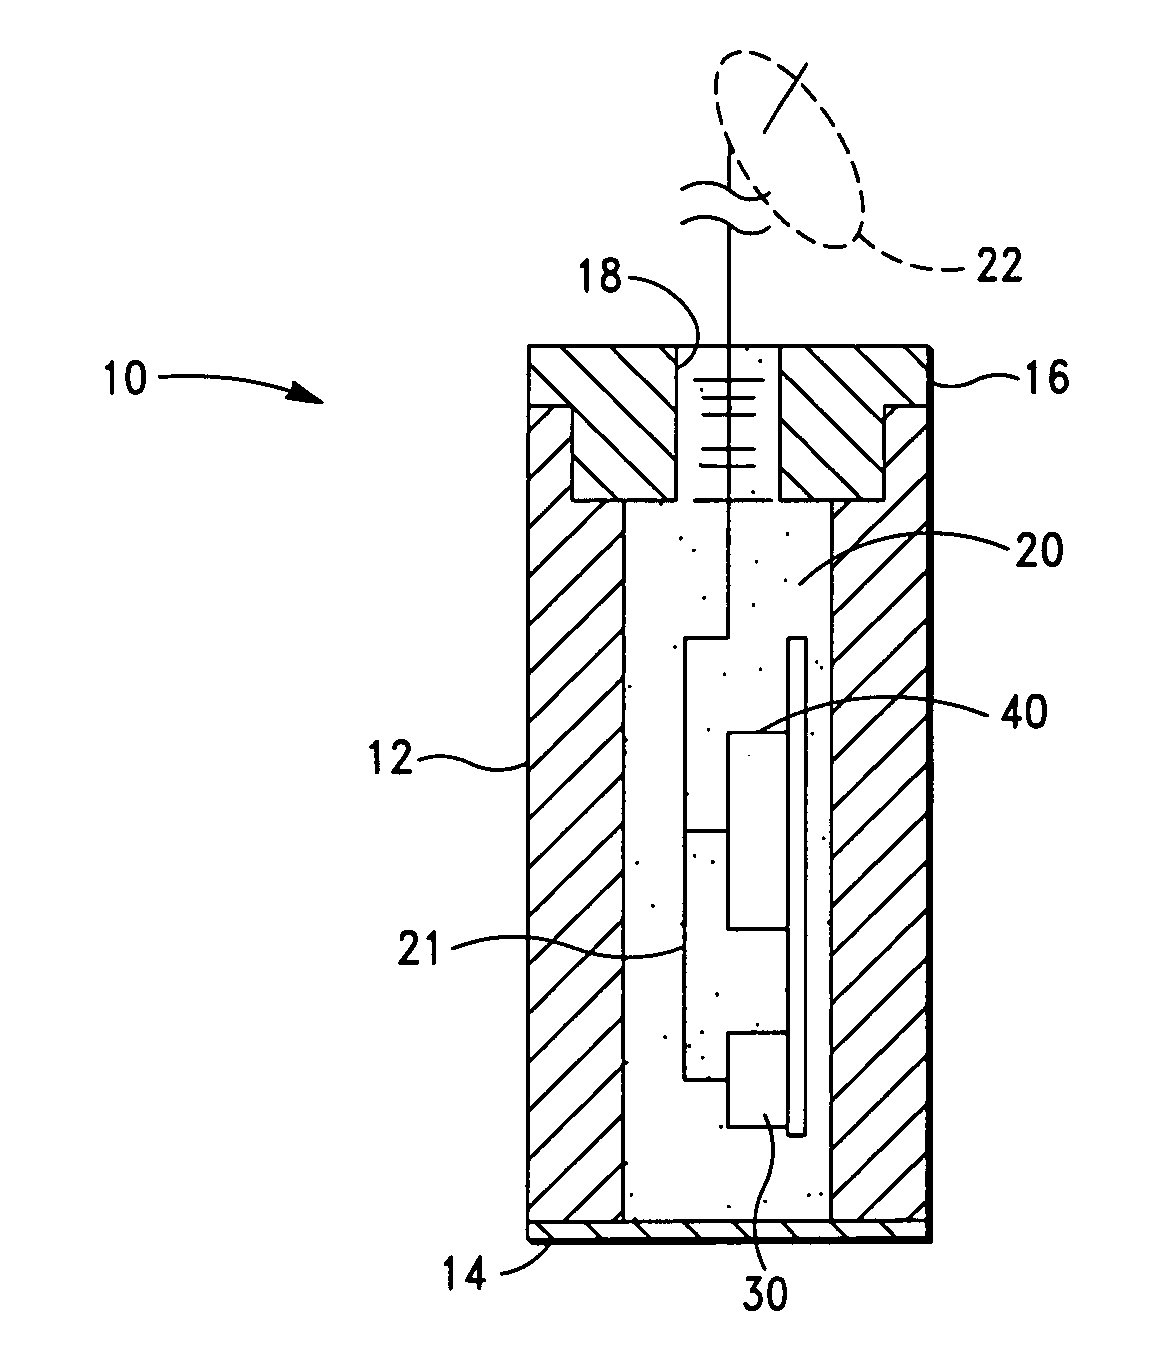 Method and system for monitoring pressure in a body cavity